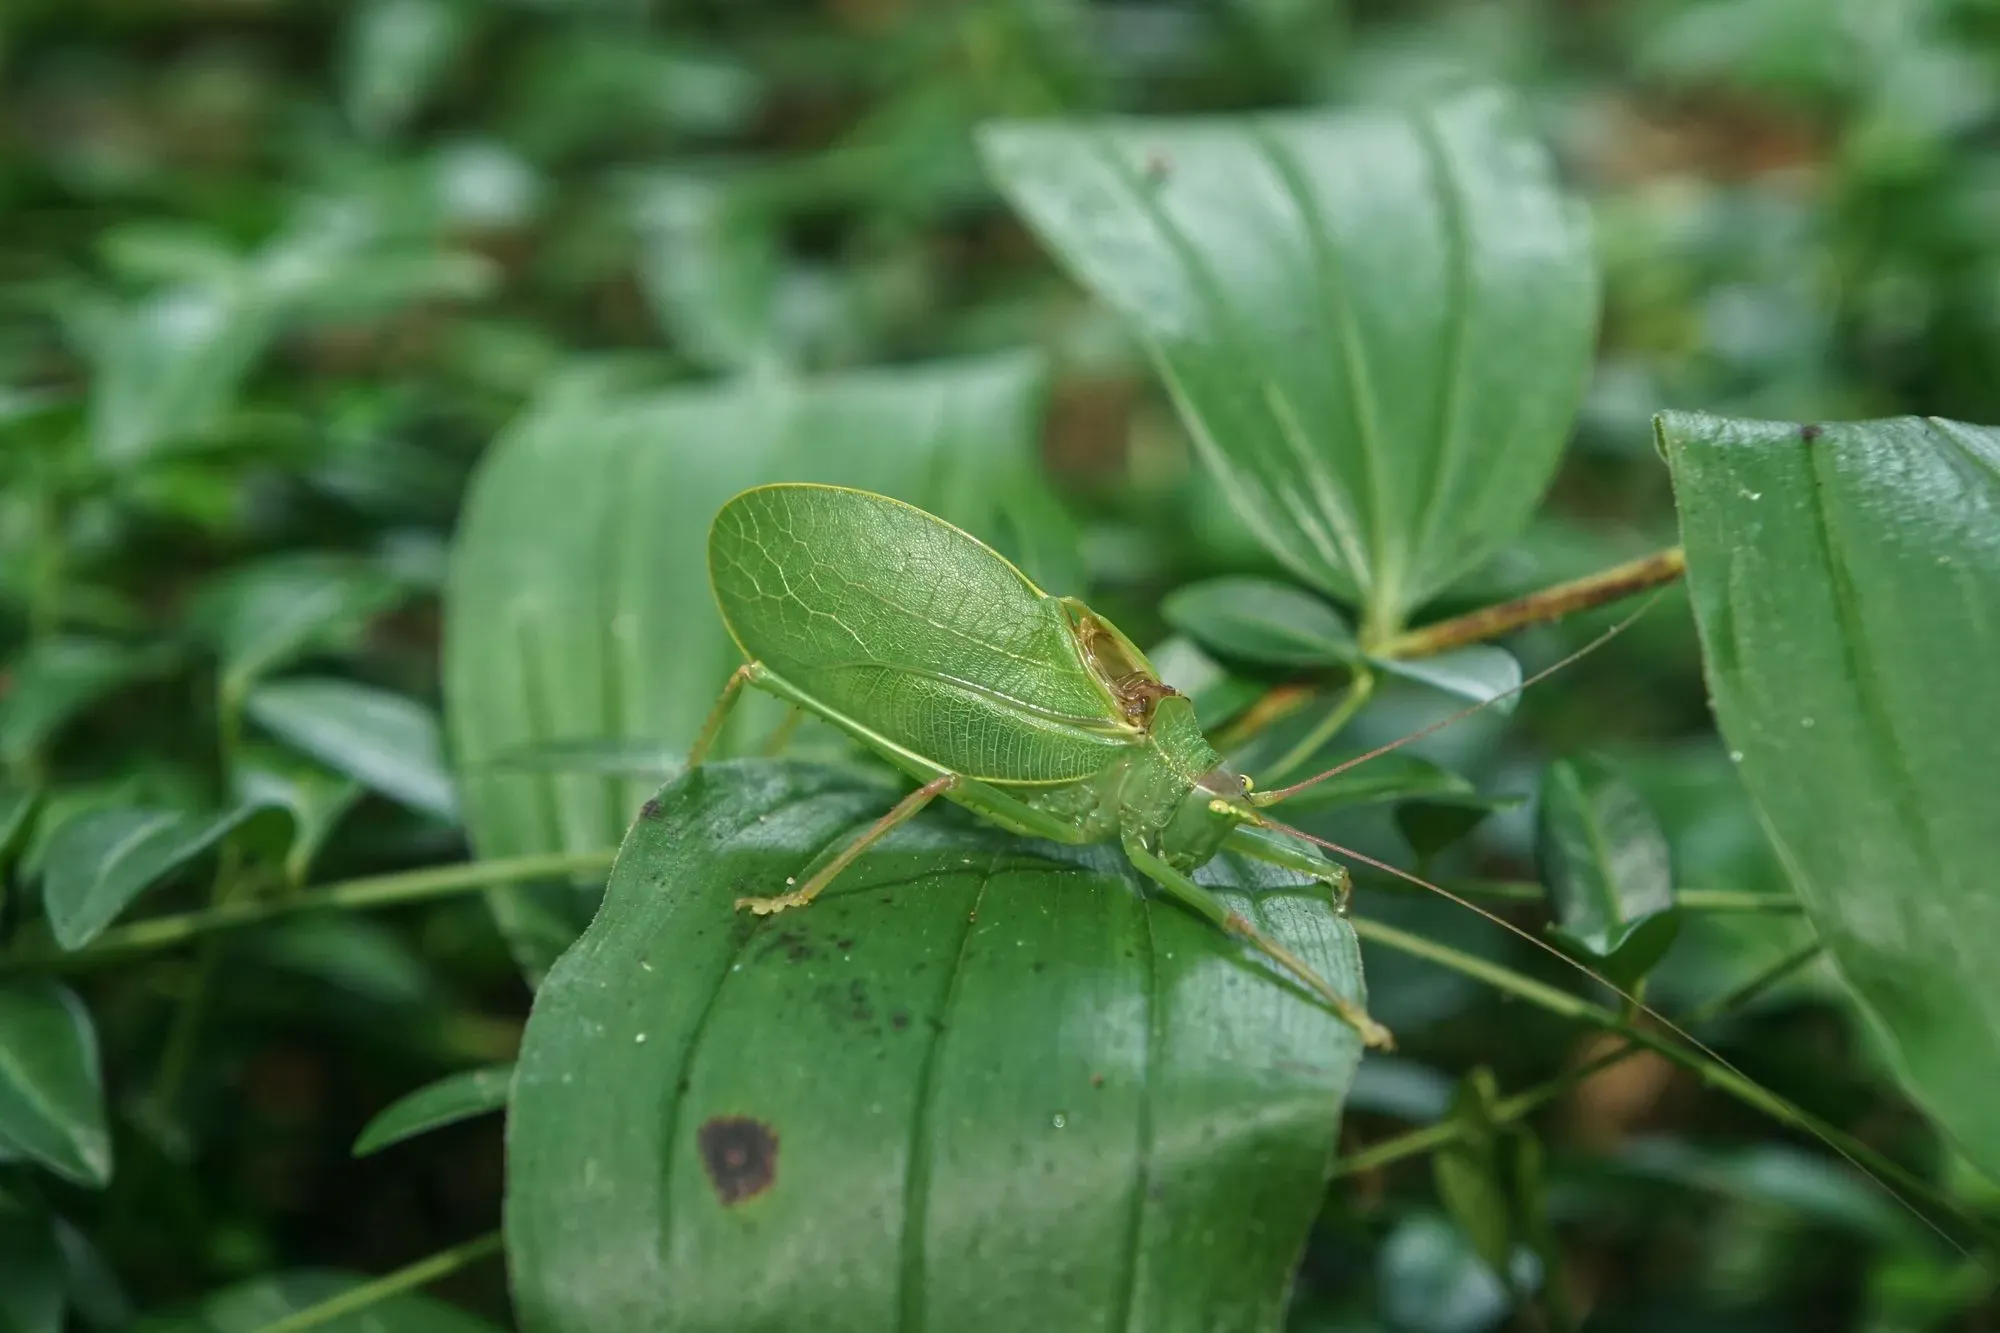 A katydid bite can cause itching, swelling, or discomfort.